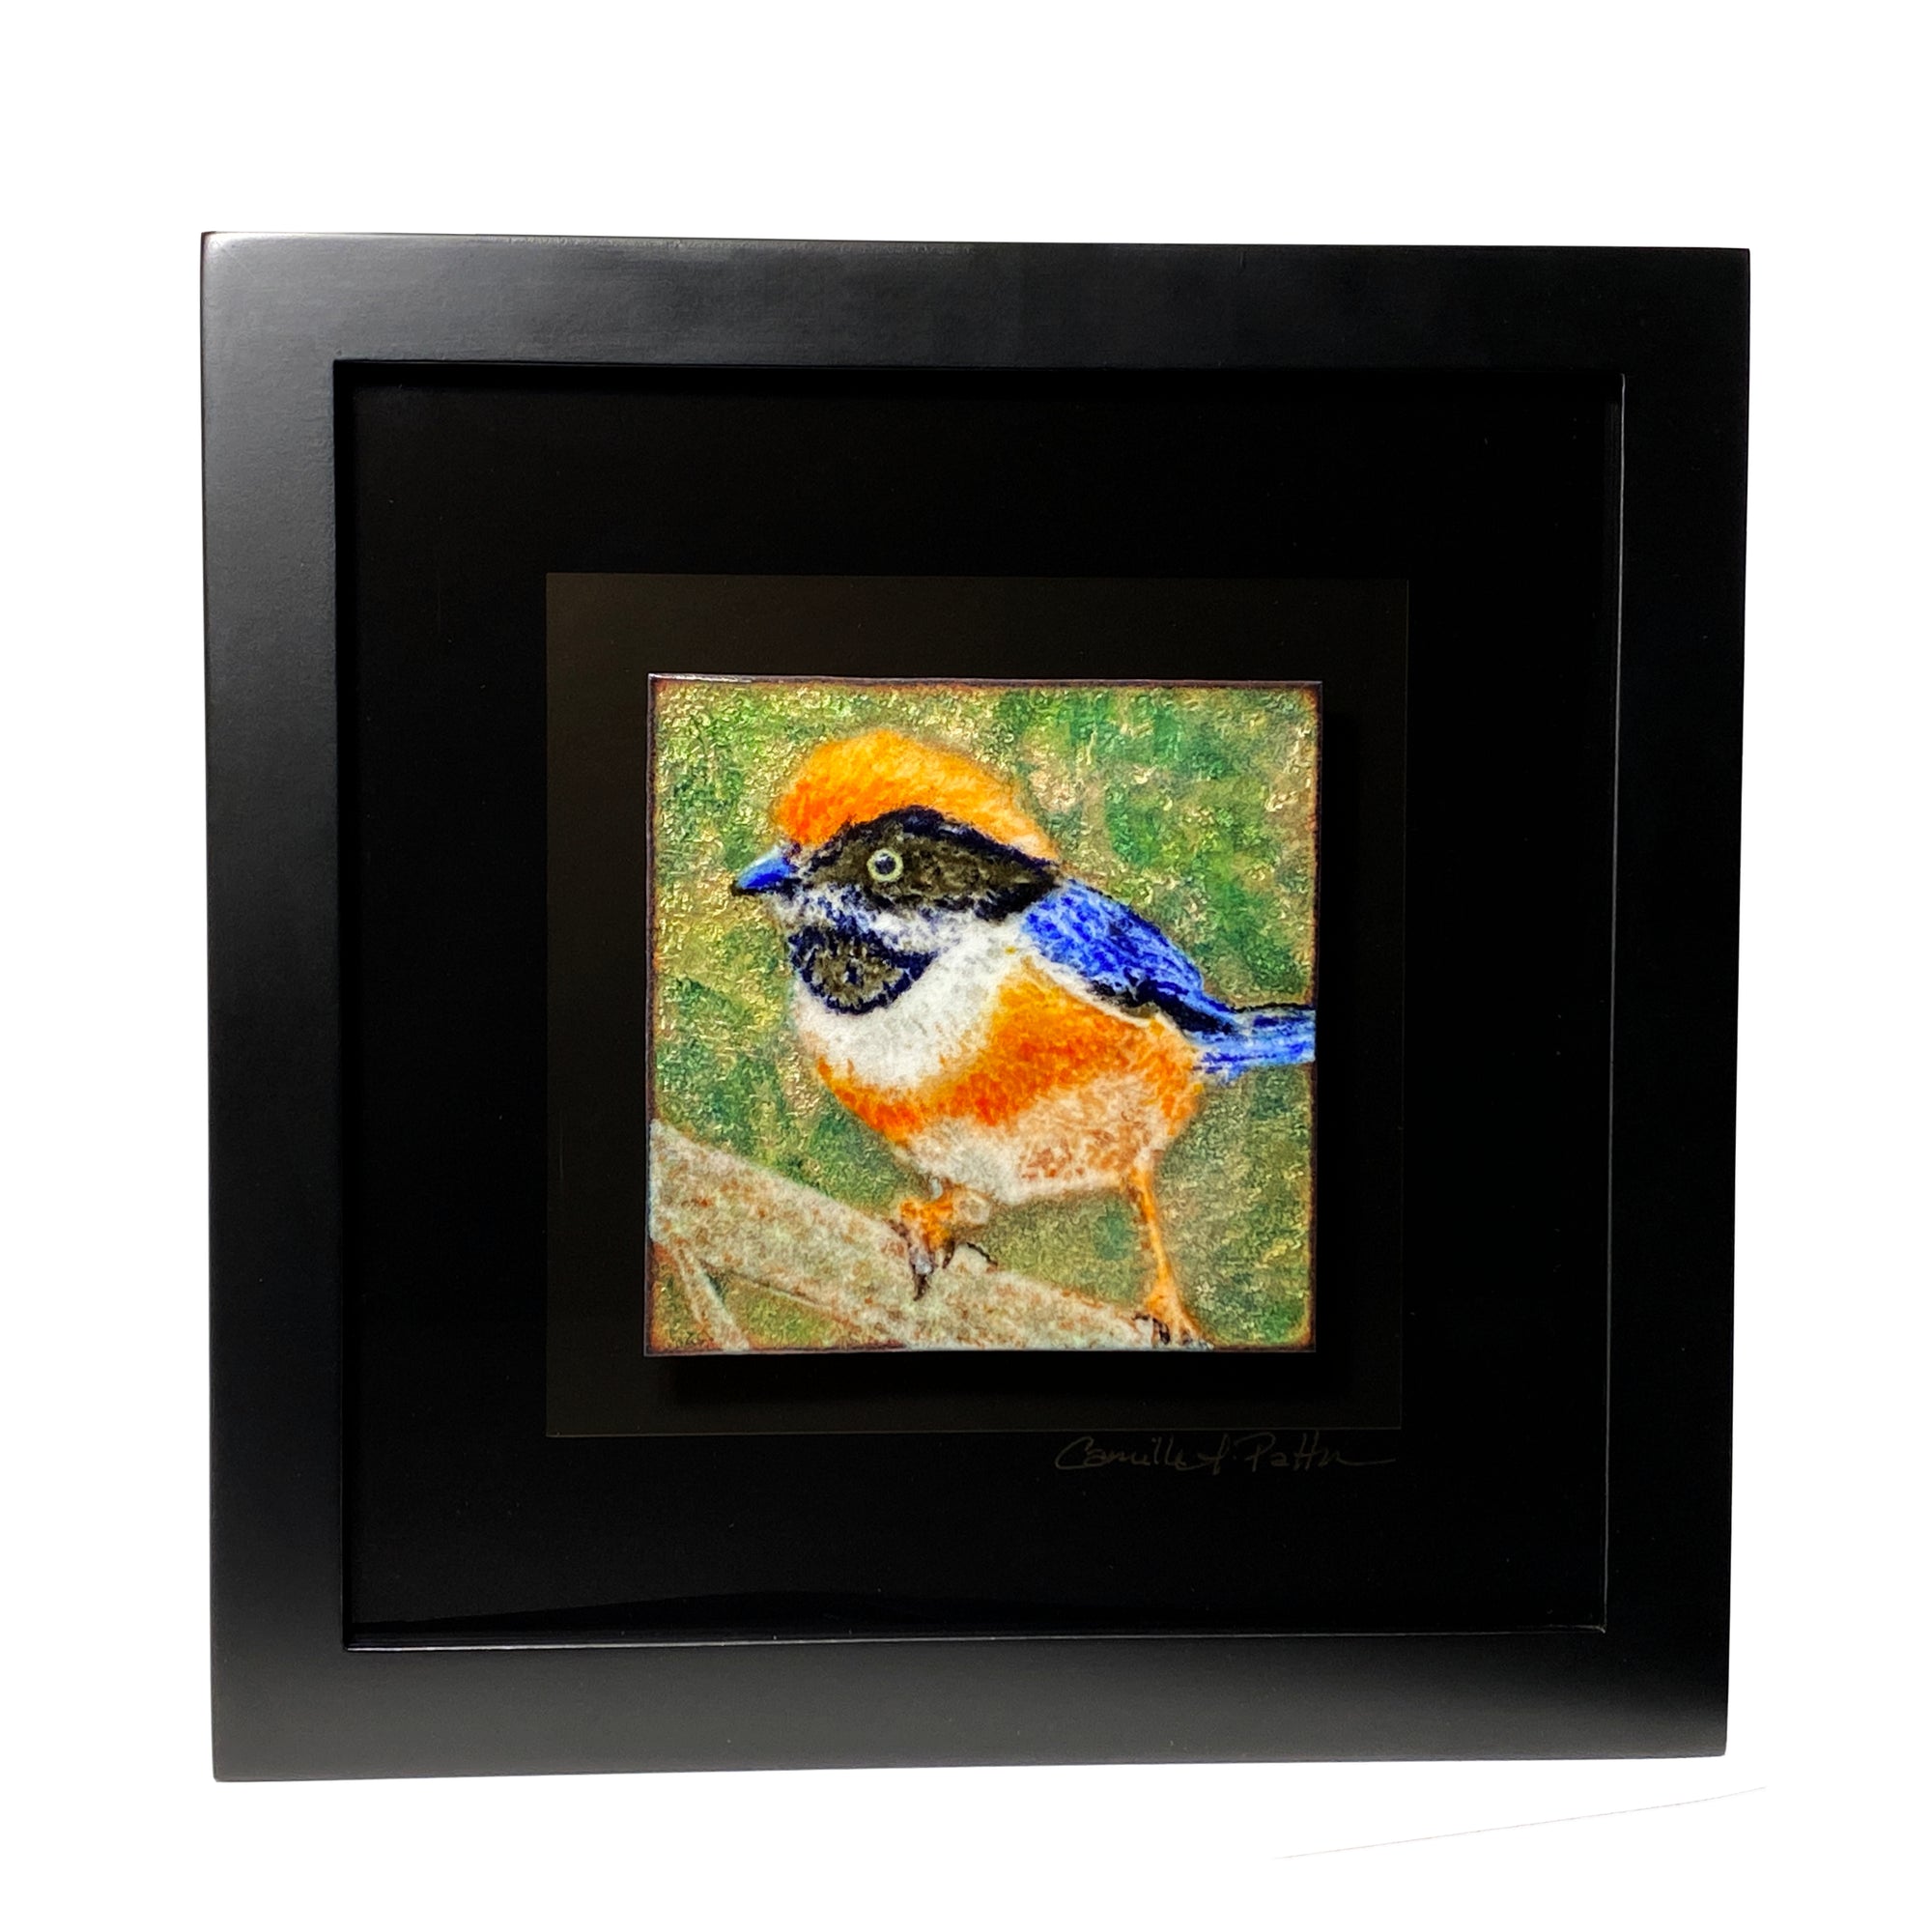 Camille Patton Black Throated Tit from the Exotic Bird Series Vitreous Enamel Framed Wall Art